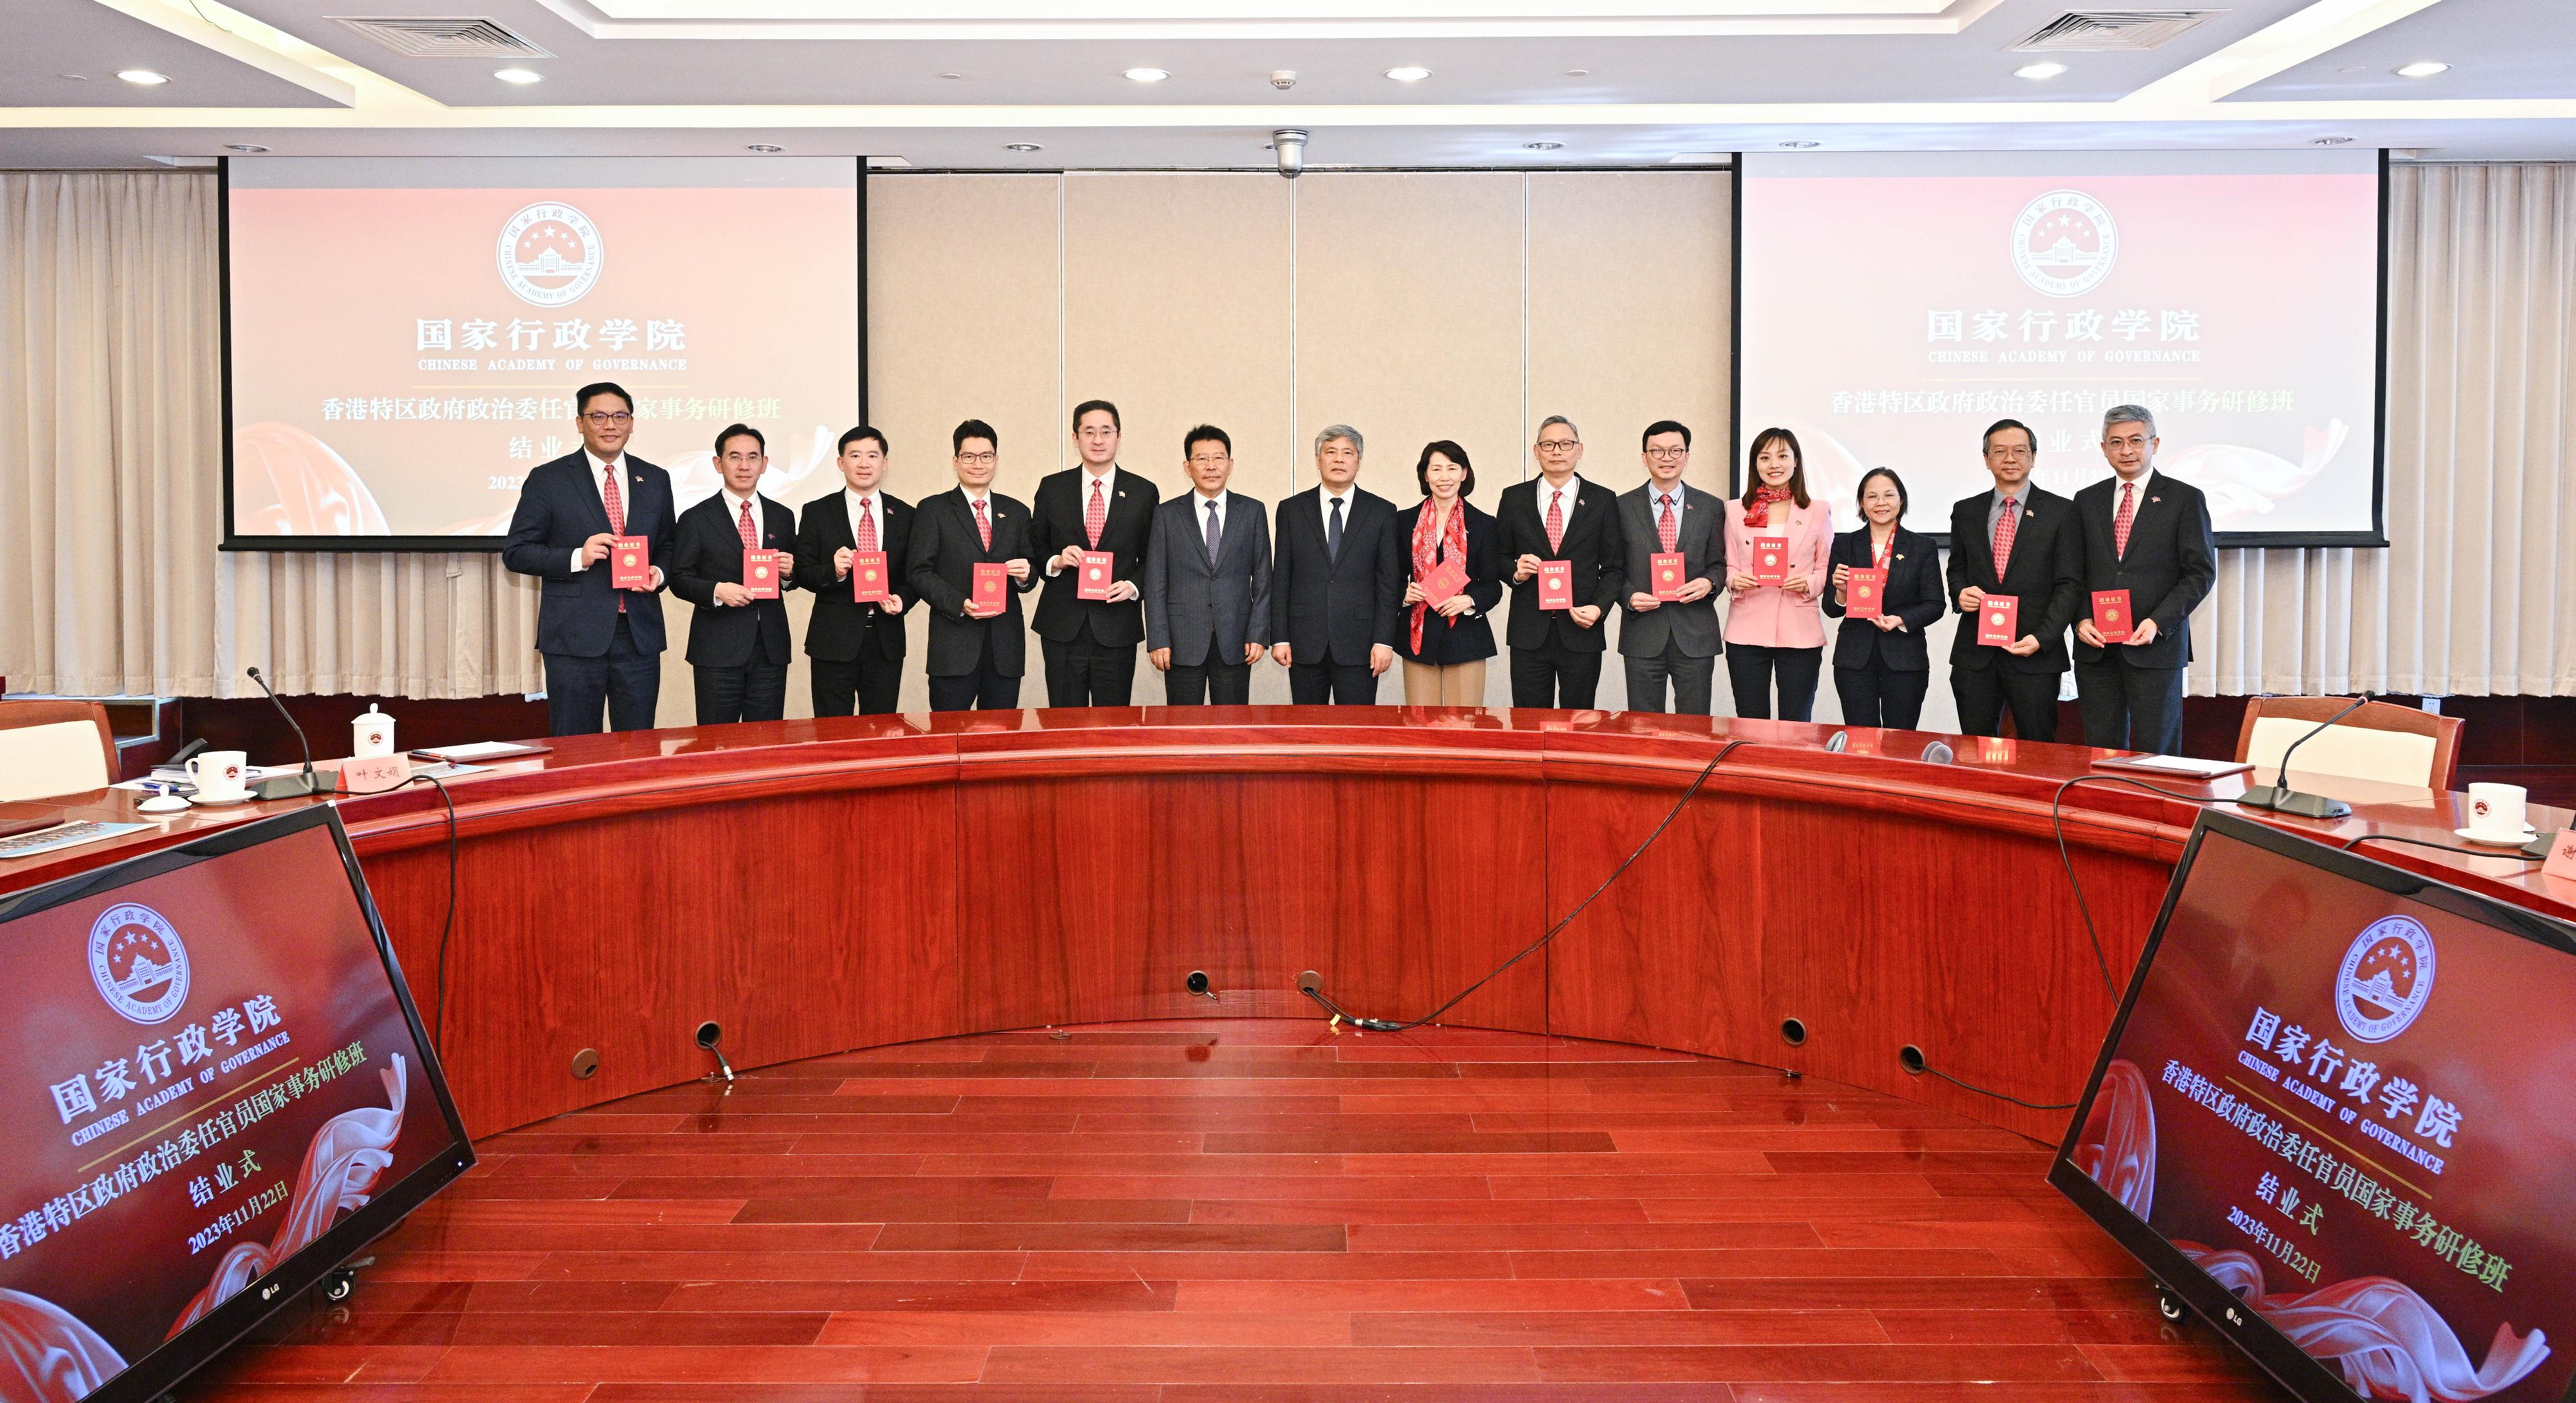 A delegation of politically appointed officials completed its national studies programme today (November 22). Photo shows the Executive Vice President of the National Academy of Governance (NAG) in charge of daily operations, Professor Xie Chuntao (seventh left), presenting Certificates of Completion of the NAG to the delegates at the programme's closing ceremony. Also pictured are Deputy Director of the Hong Kong and Macao Affairs Office of the State Council Mr Wang Linggui (sixth left) and the Director of the Chief Executive's Office, Ms Carol Yip (seventh right).